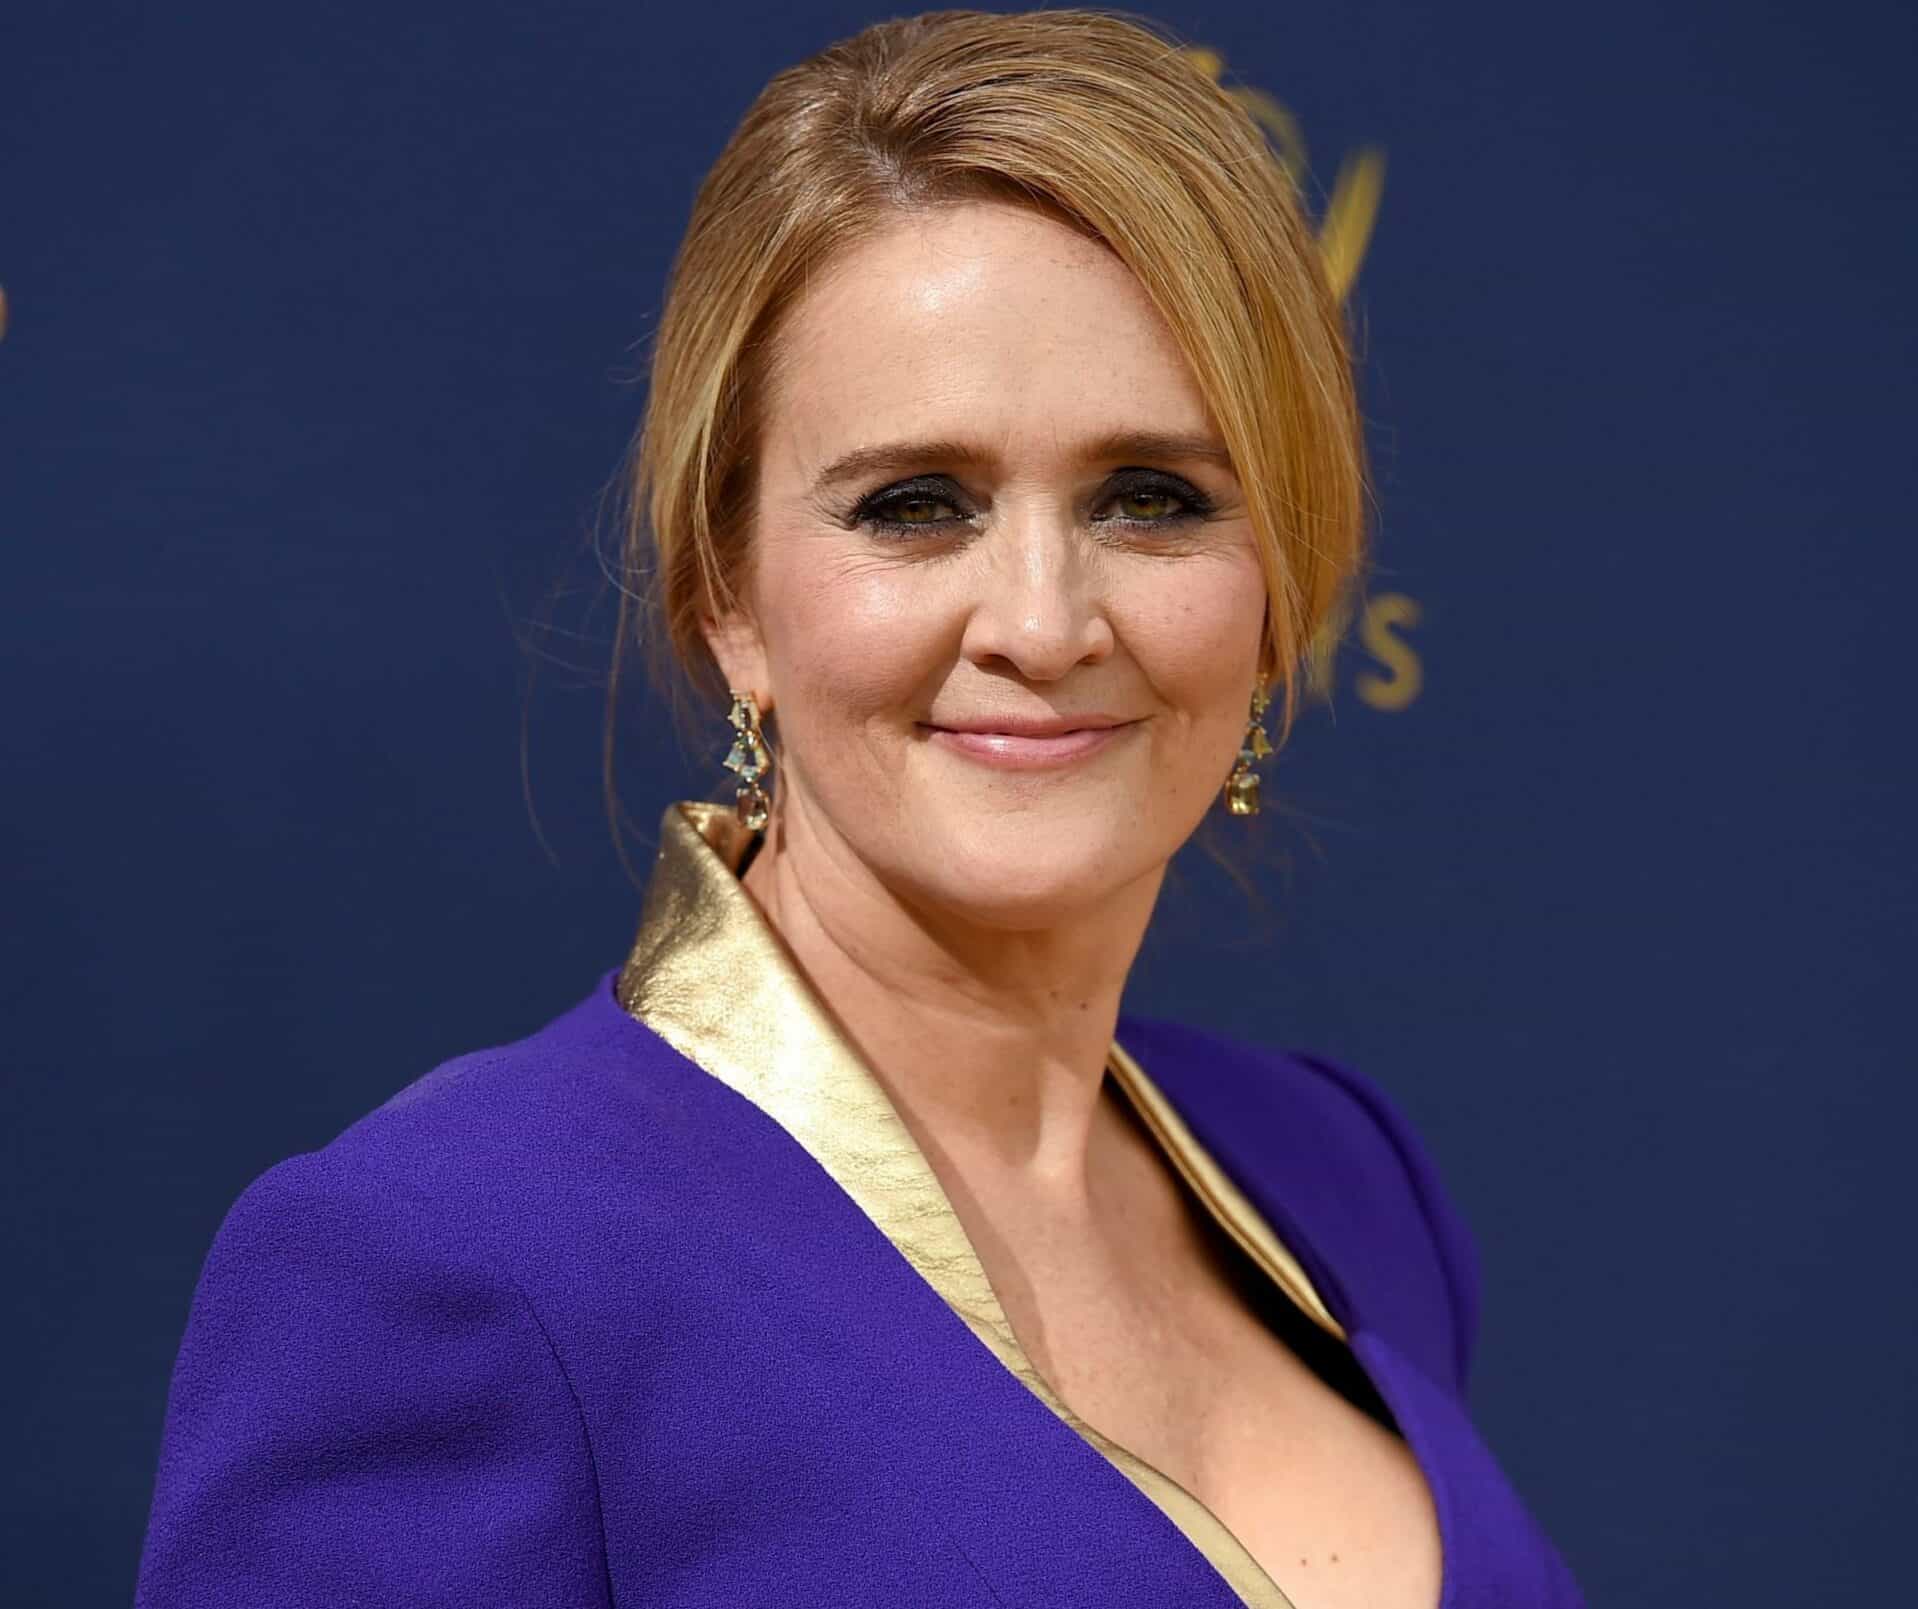 Samantha Bee's net worth is approximately $8 million